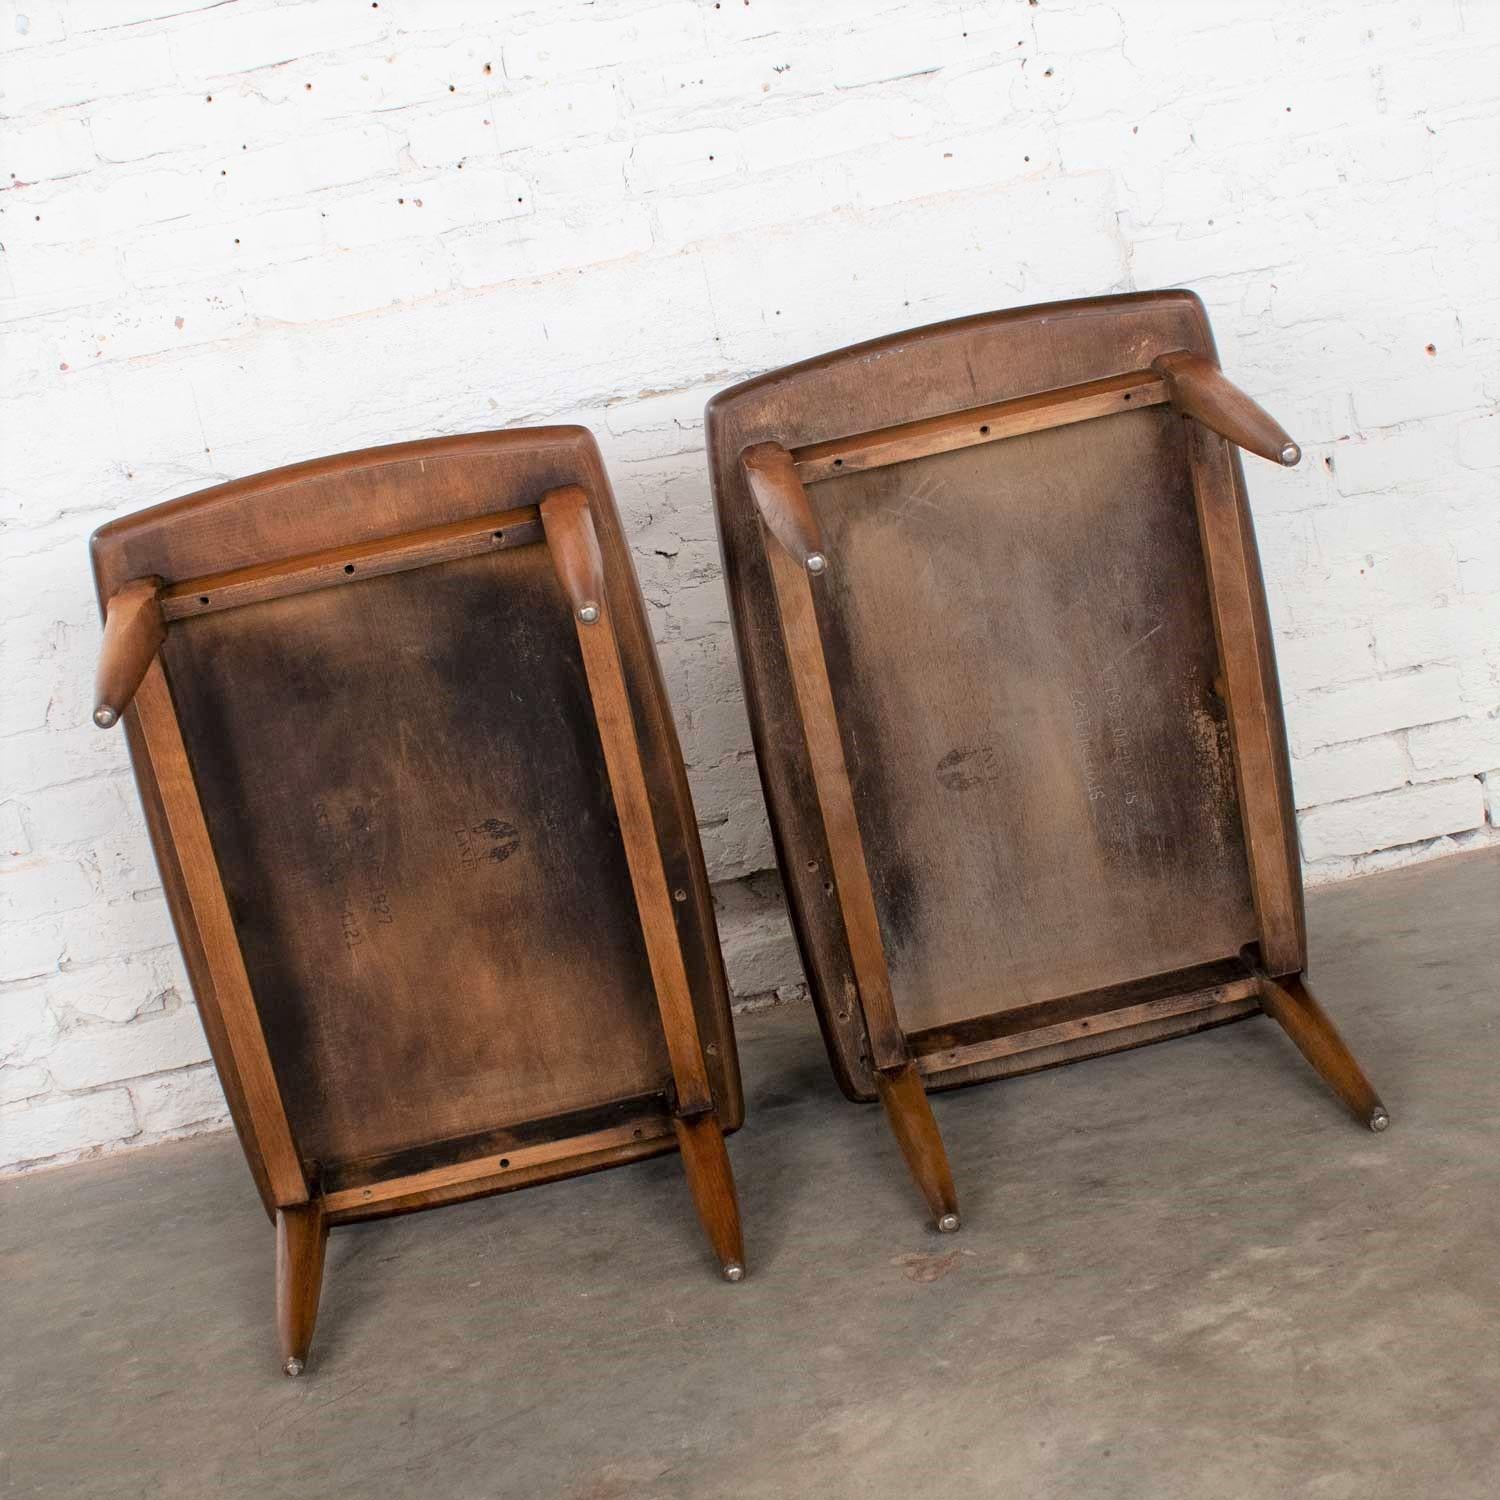 Mid-Century Modern Pair of Lane Step End Tables with Inlaid Walnut Burl Style For Sale 3